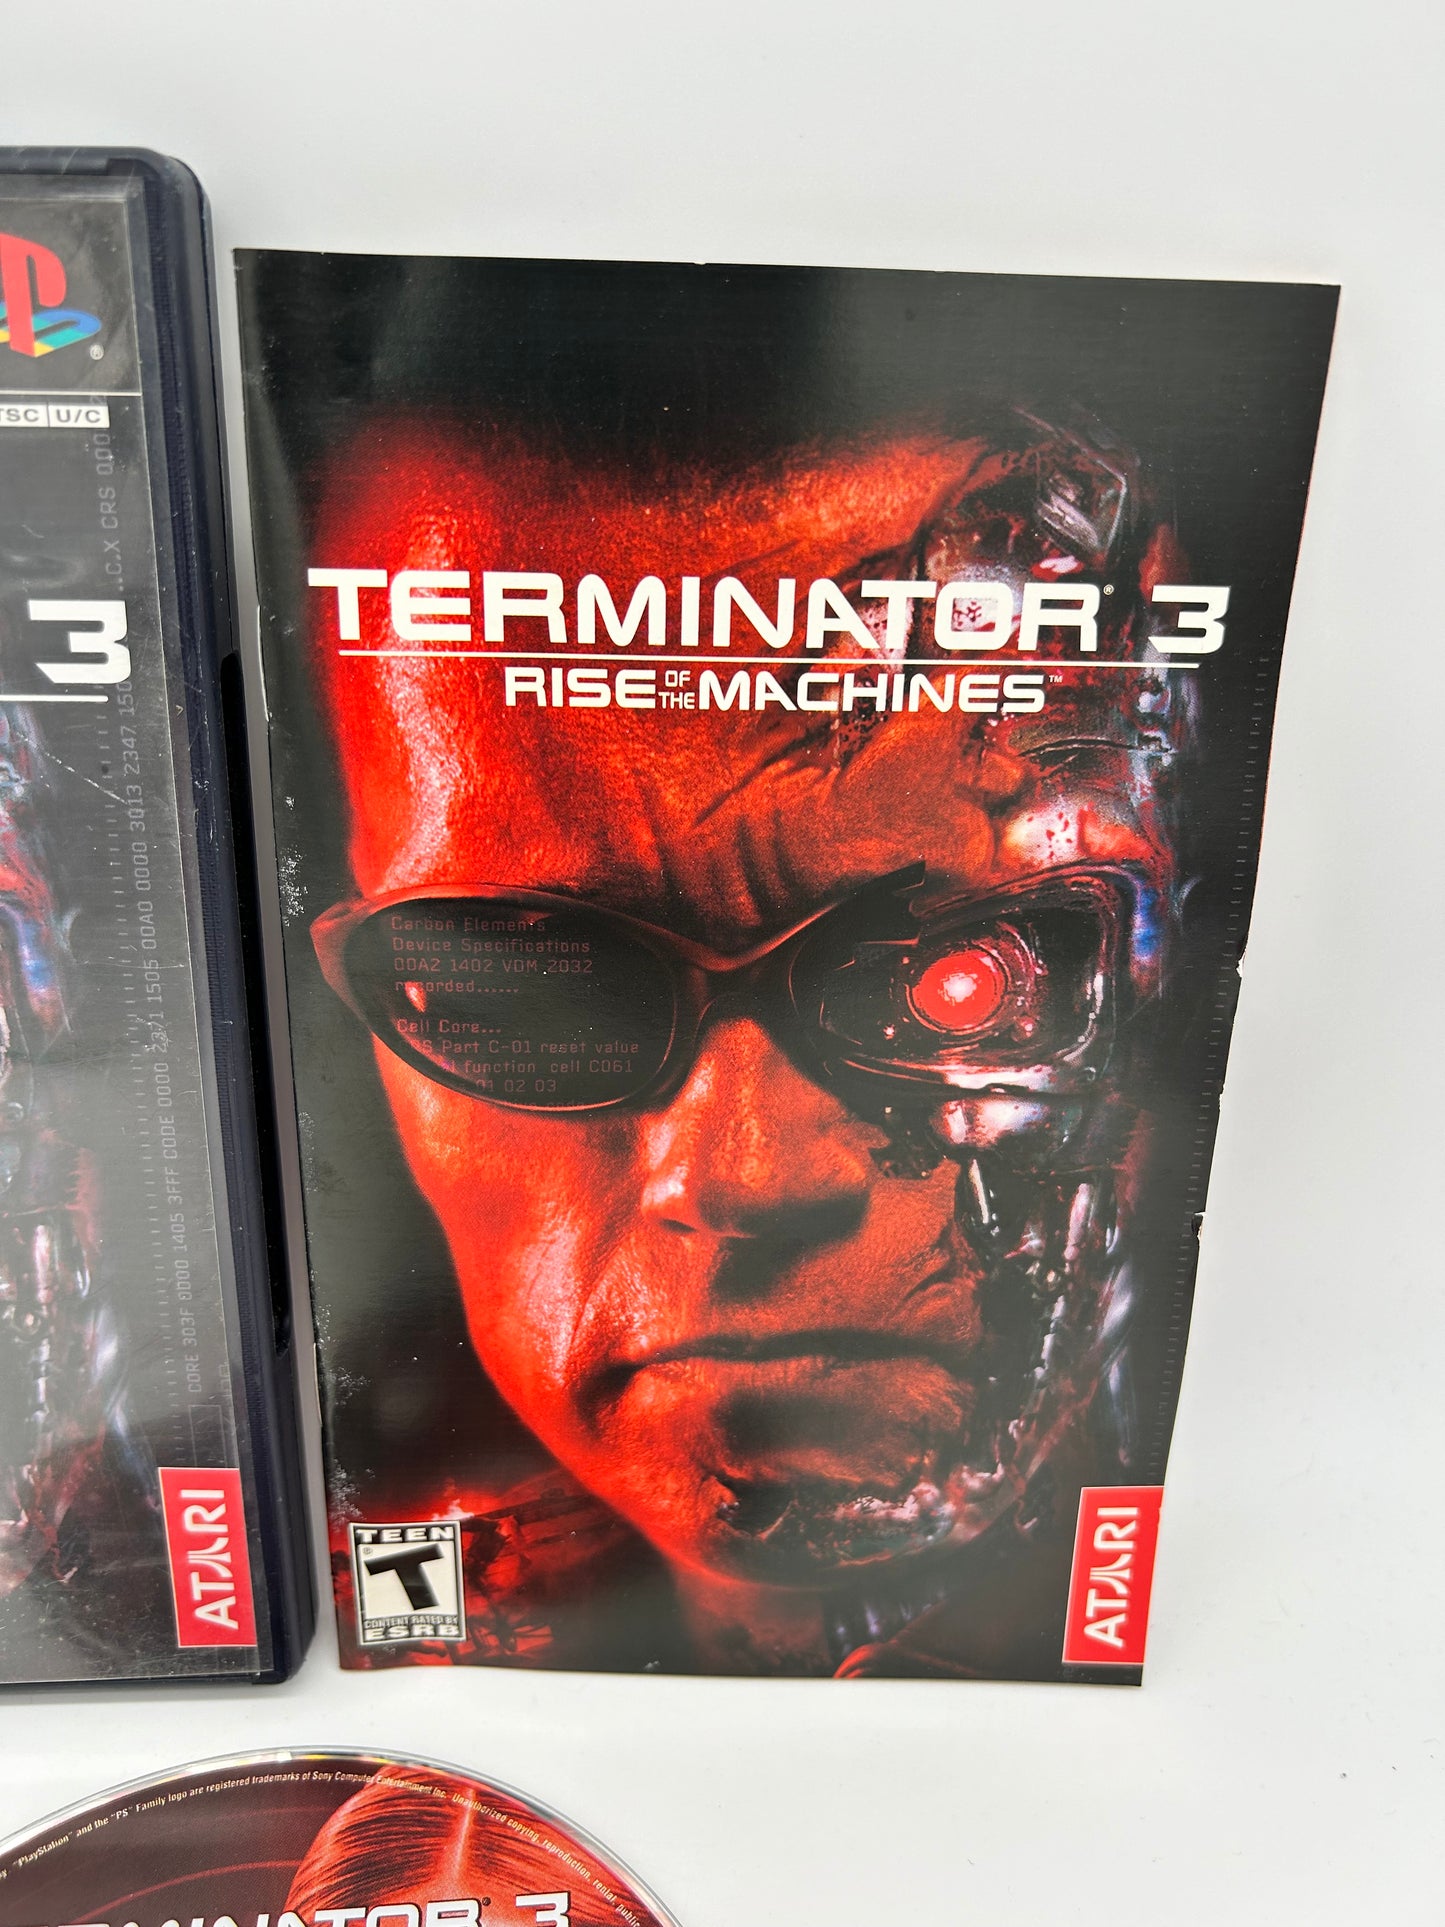 SONY PLAYSTATiON 2 [PS2] | TERMiNATOR 3 RiSE OF THE MACHiNES